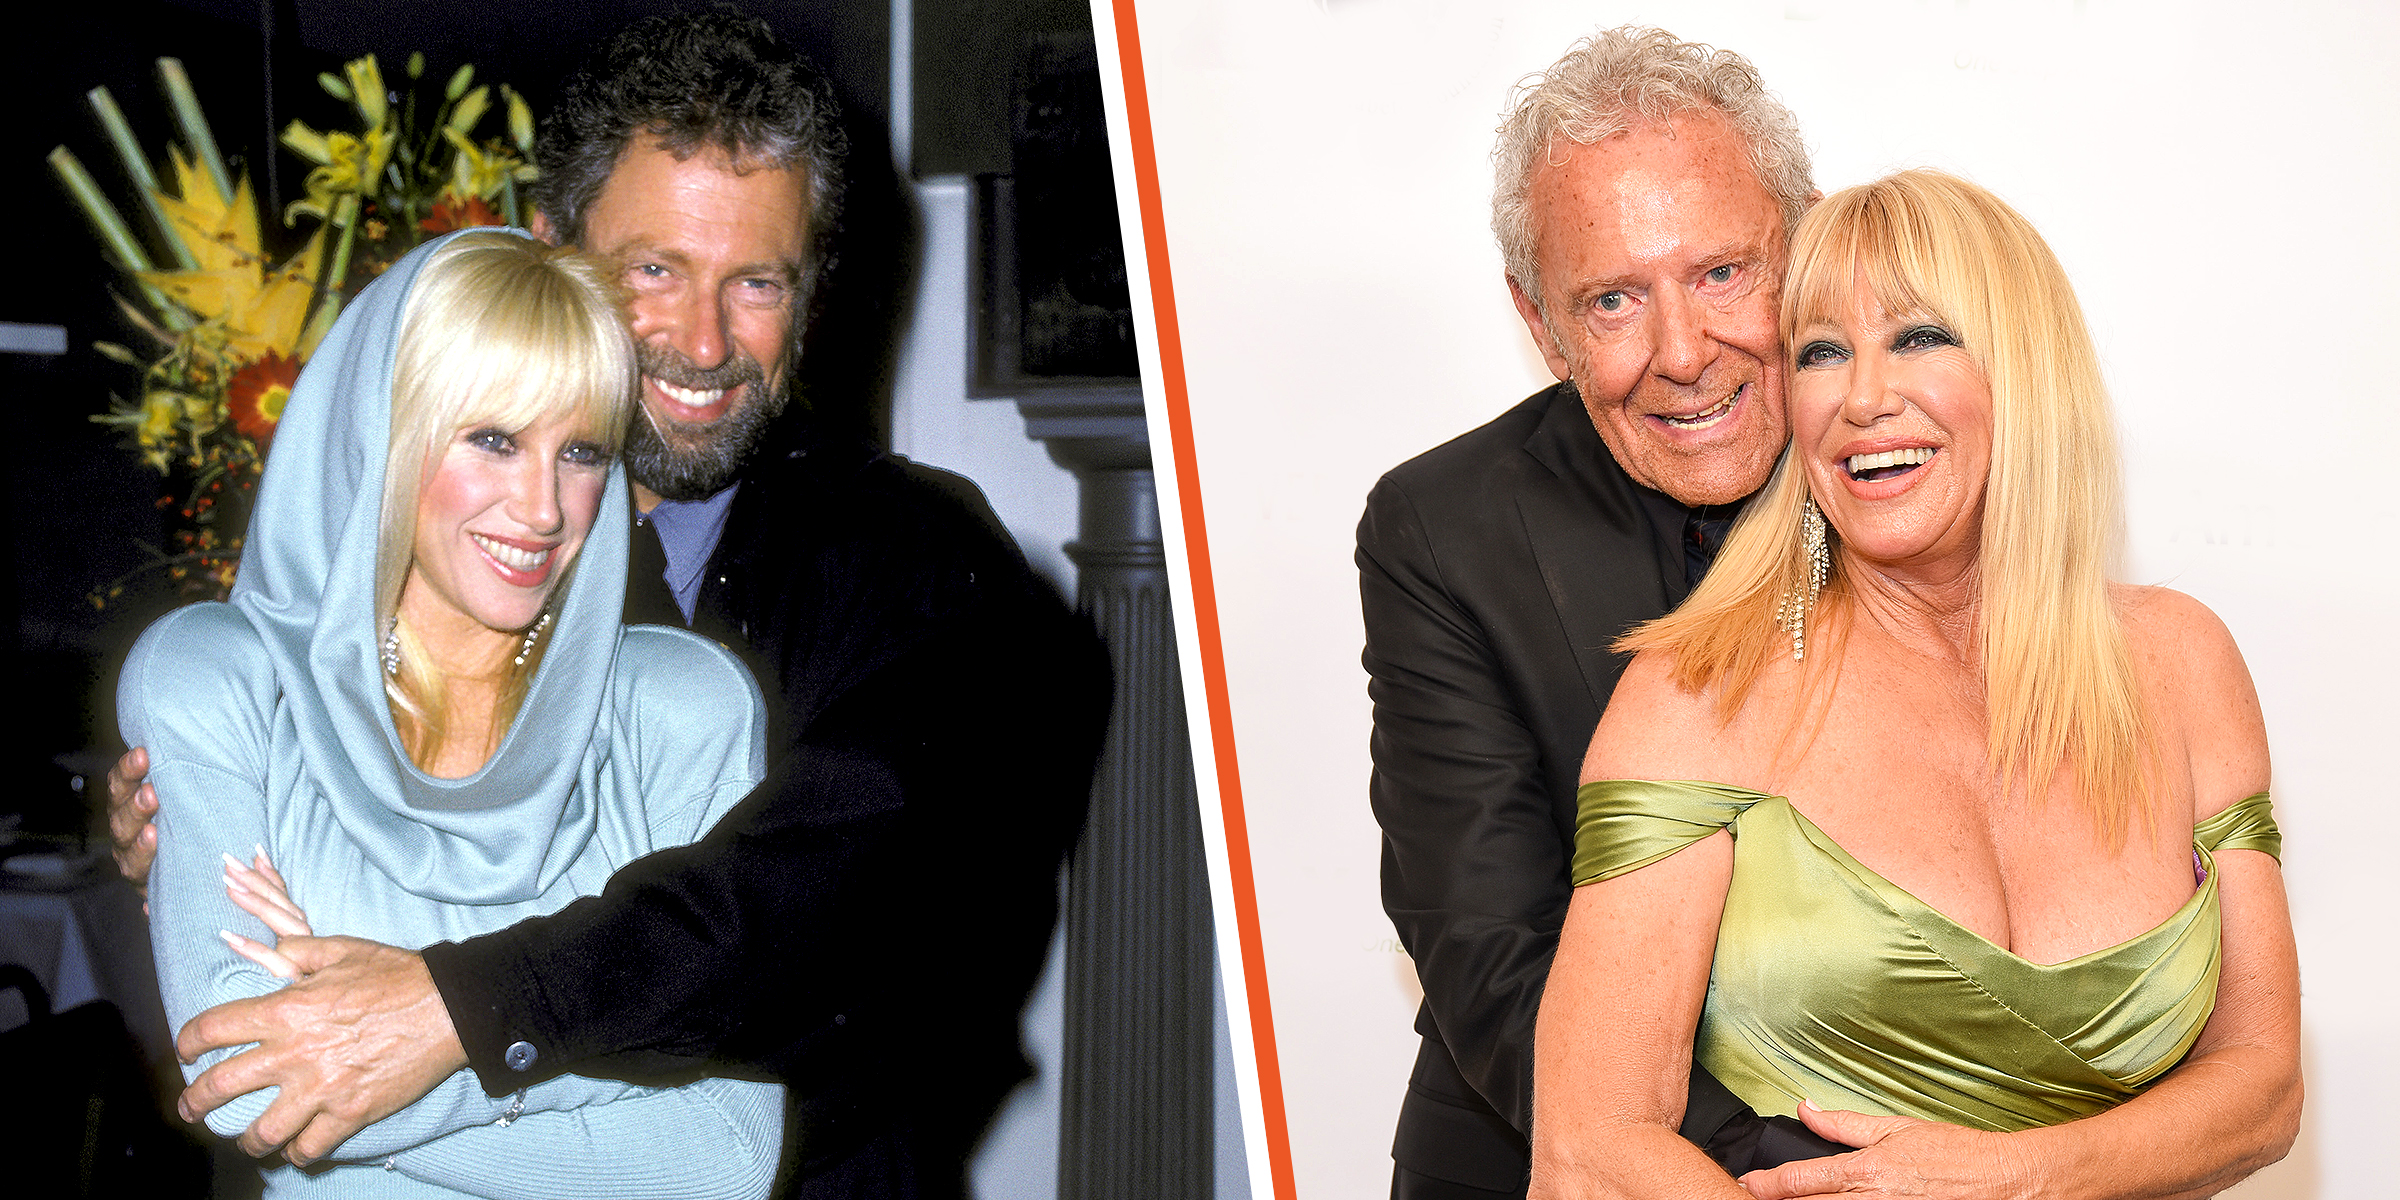 Suzanne Somers and Alan Hamel, 1986 | Suzanne Somers and Alan Hamel, 2018 | Source: Getty Images